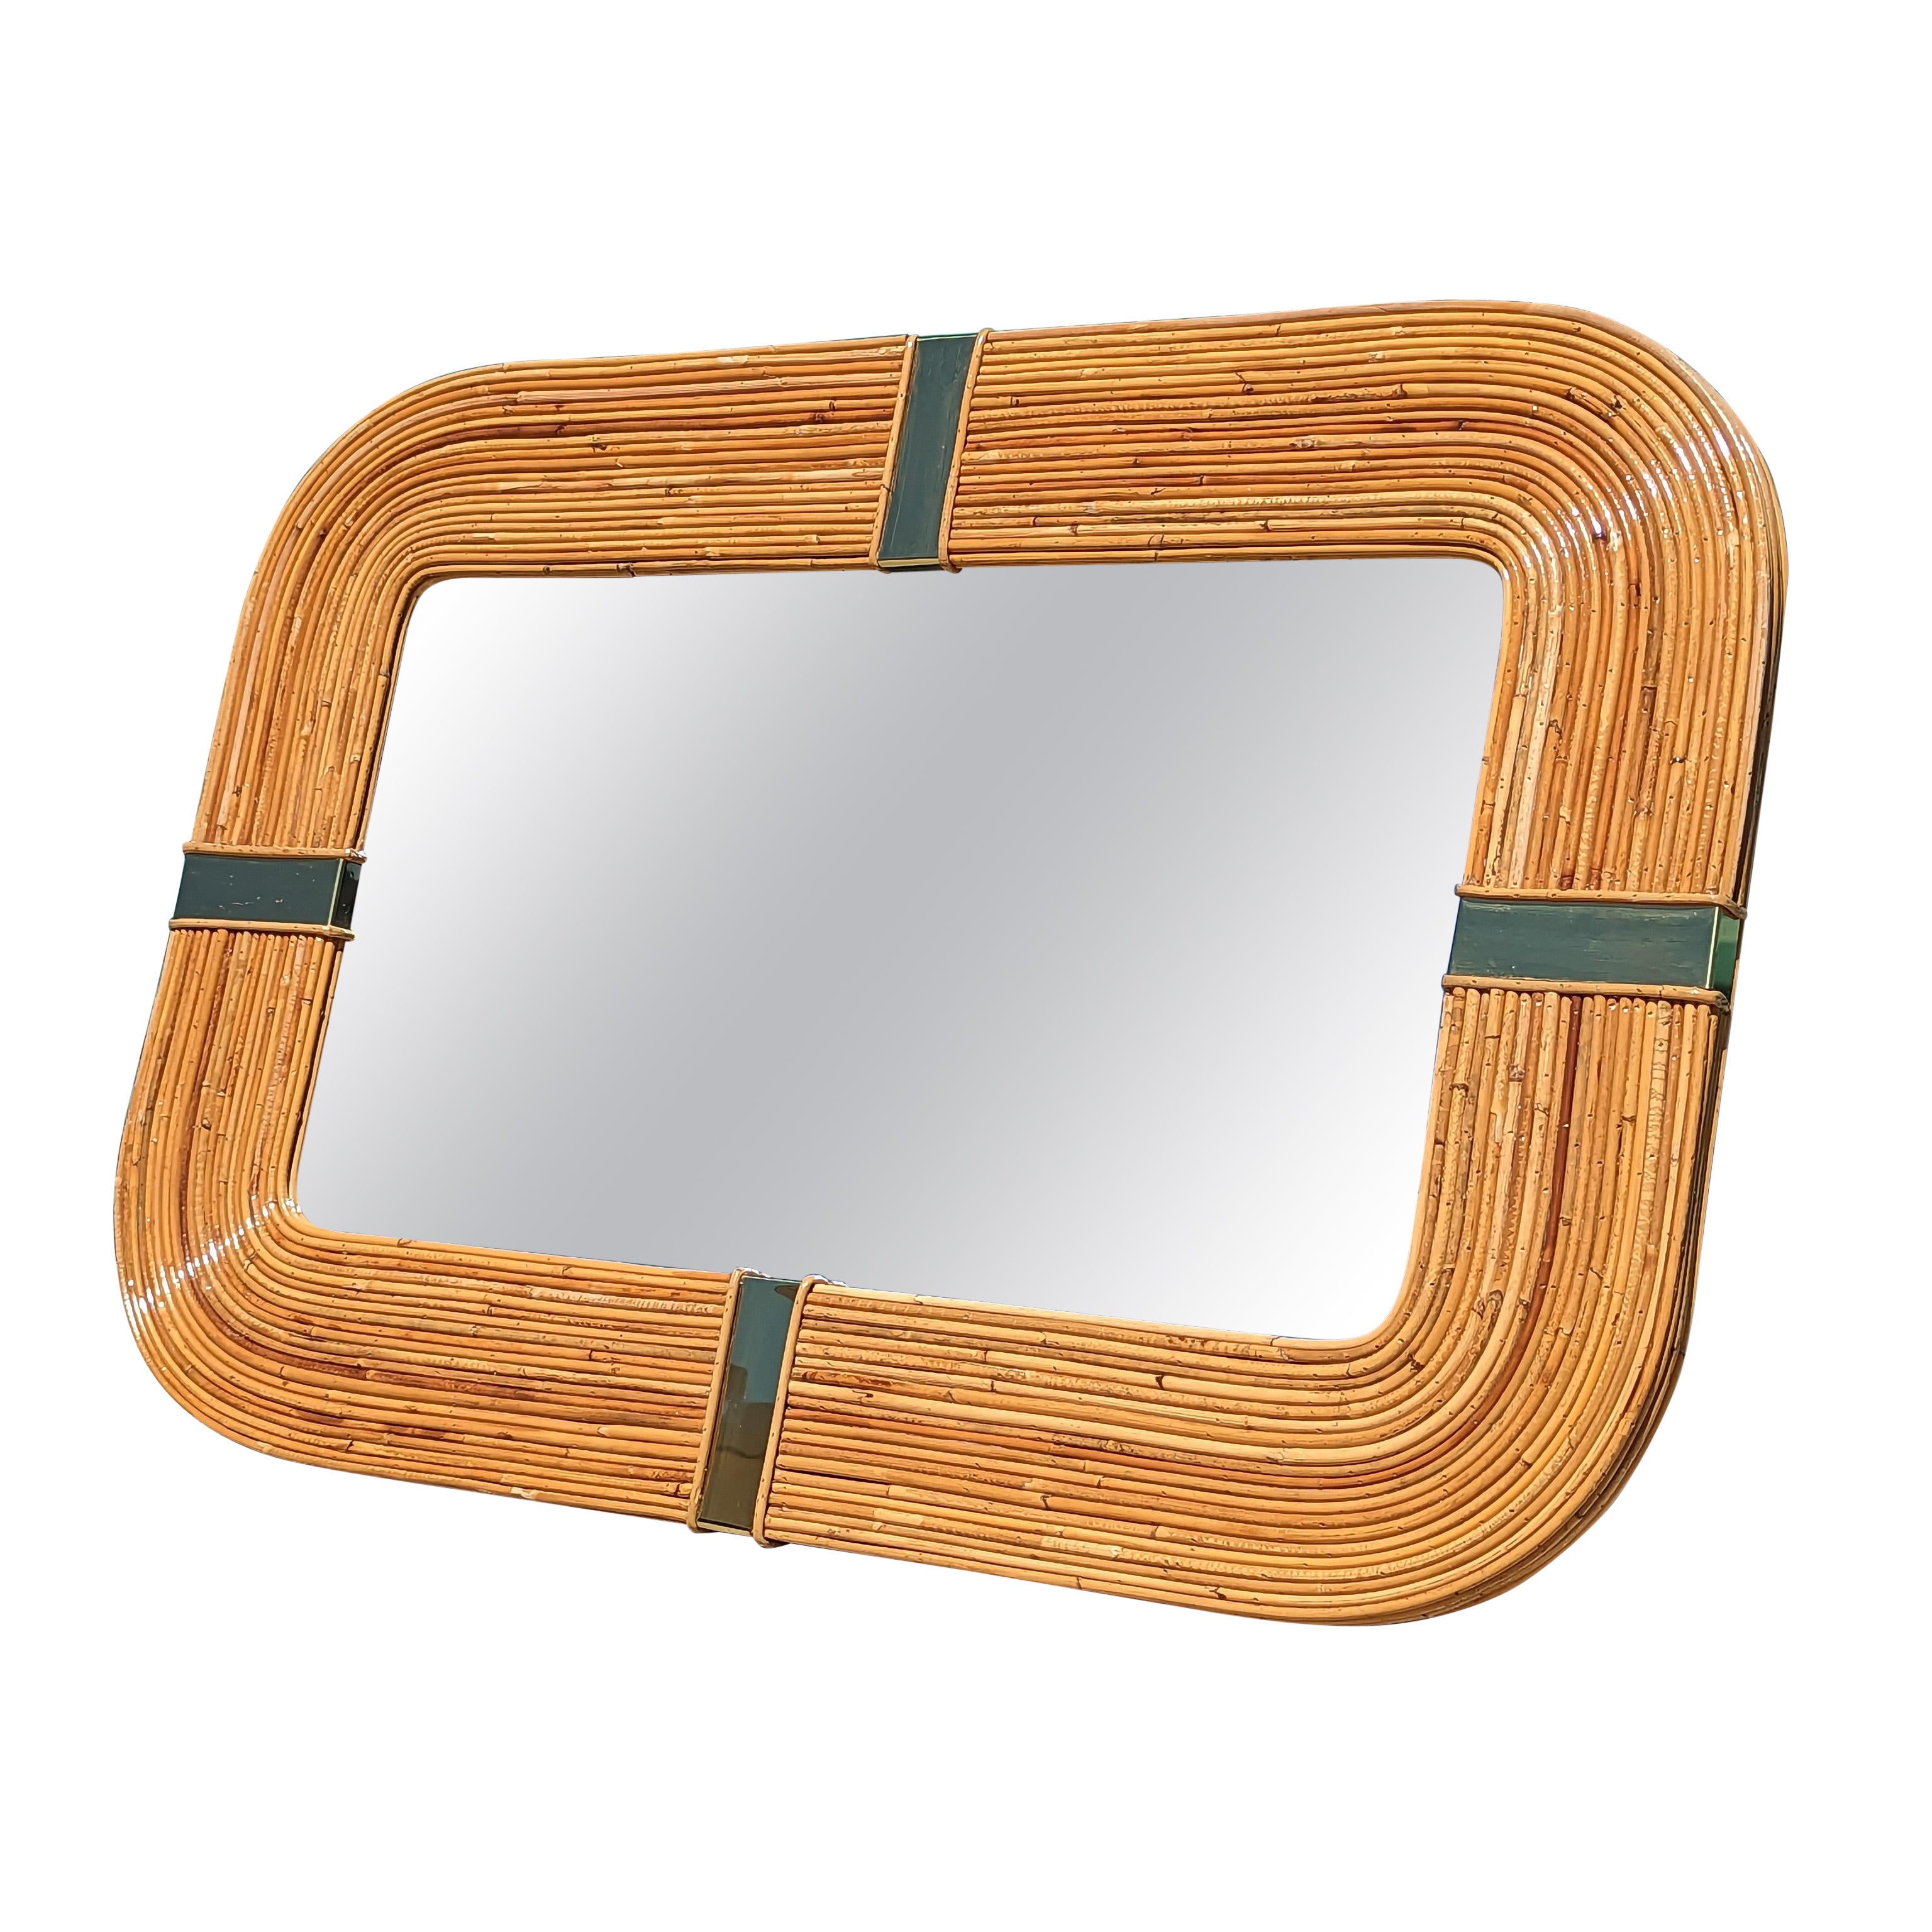 Pencil Reed Bamboo Wall Mirror in the Style of Marcello Mioni, c1970s For Sale